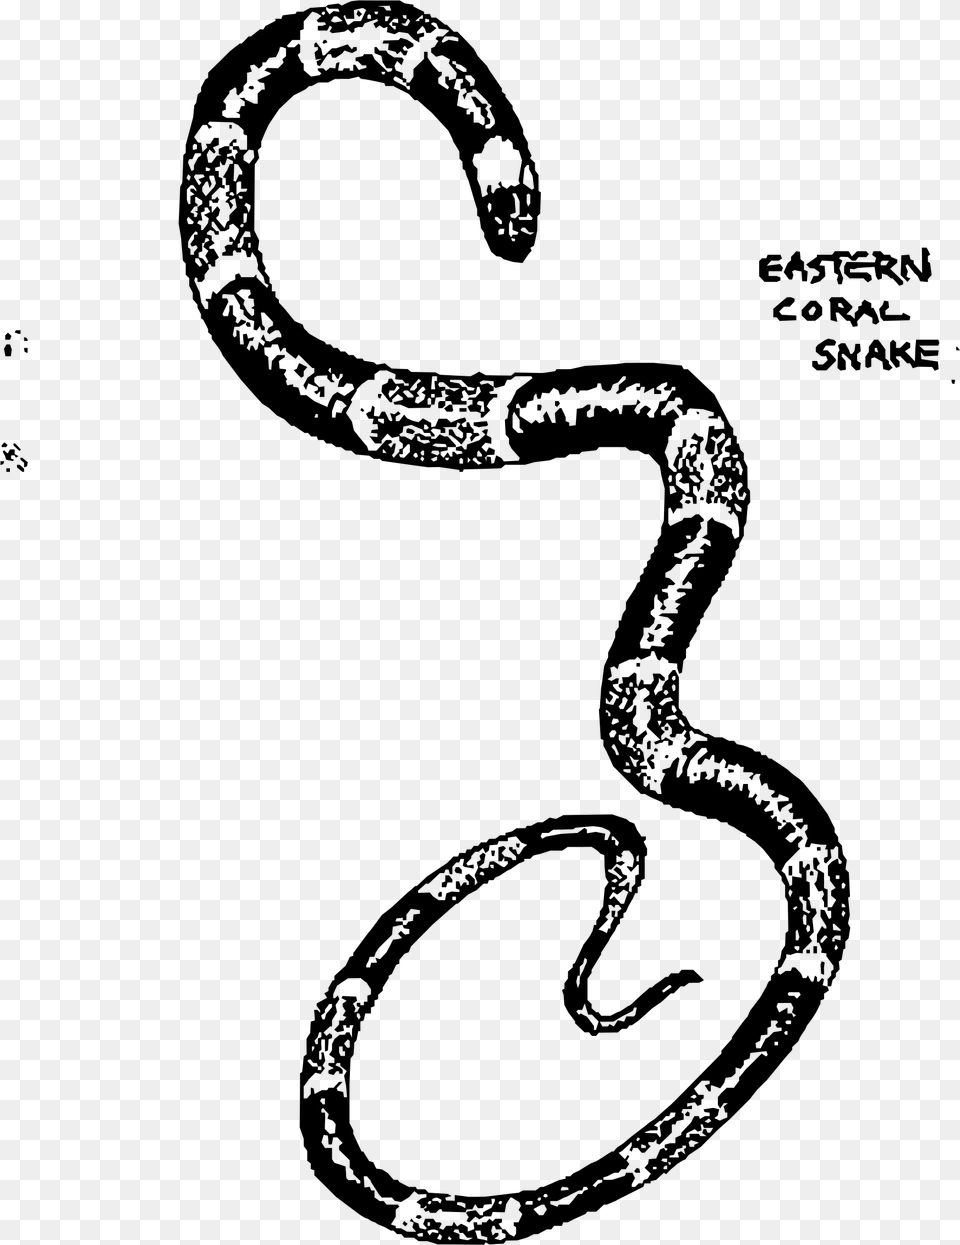 Eastern Coral Snake Clip Arts Snake Images For Snake Ladder Without Background, Gray Free Png